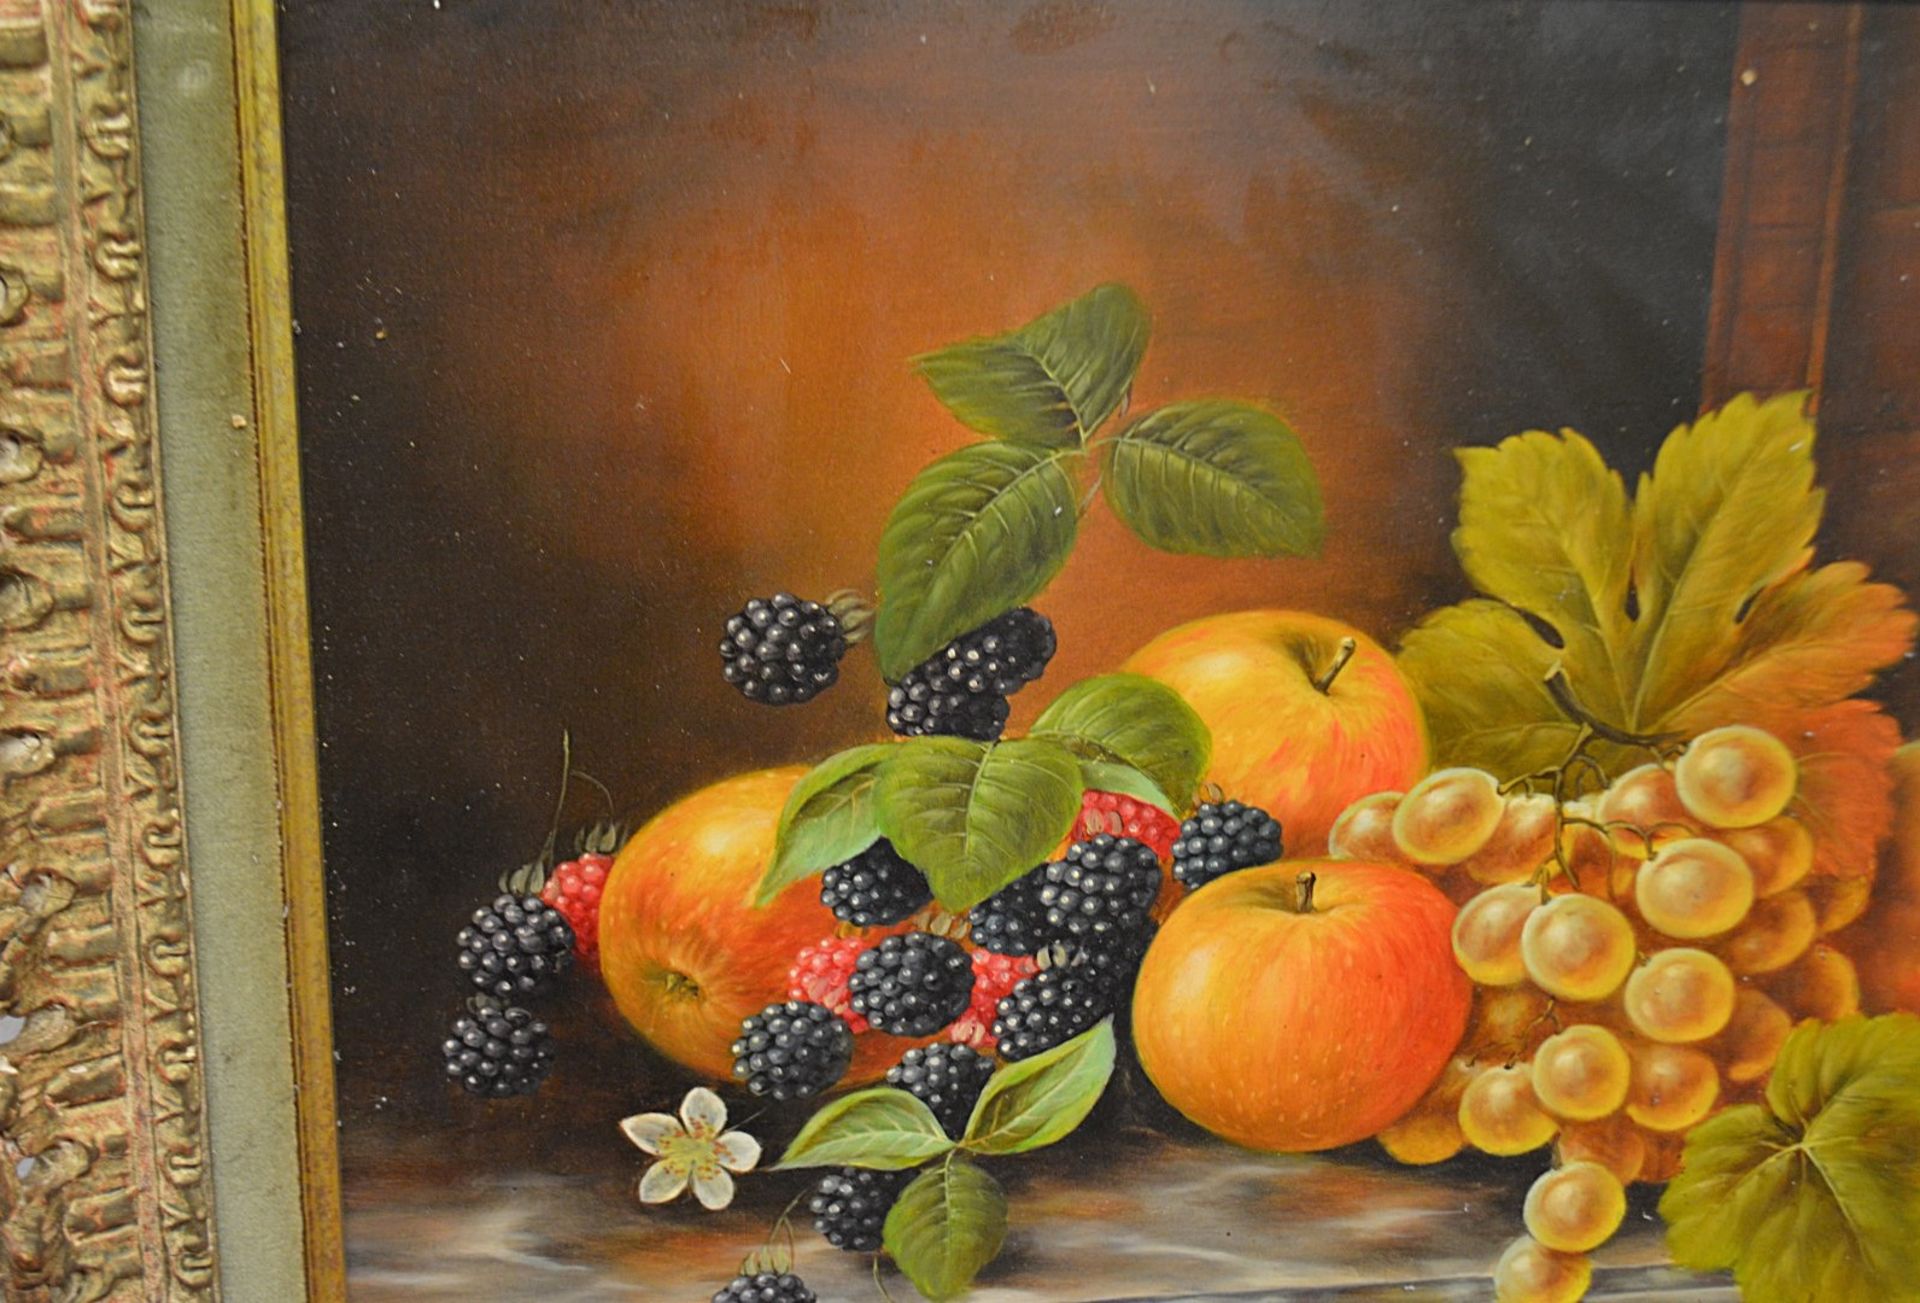 1 x Framed Picture Of Fruit - Dimensions: 52 x 42cm - Ref: MD164 / WH1 D-OFF - Pre-owned, From A - Image 3 of 5